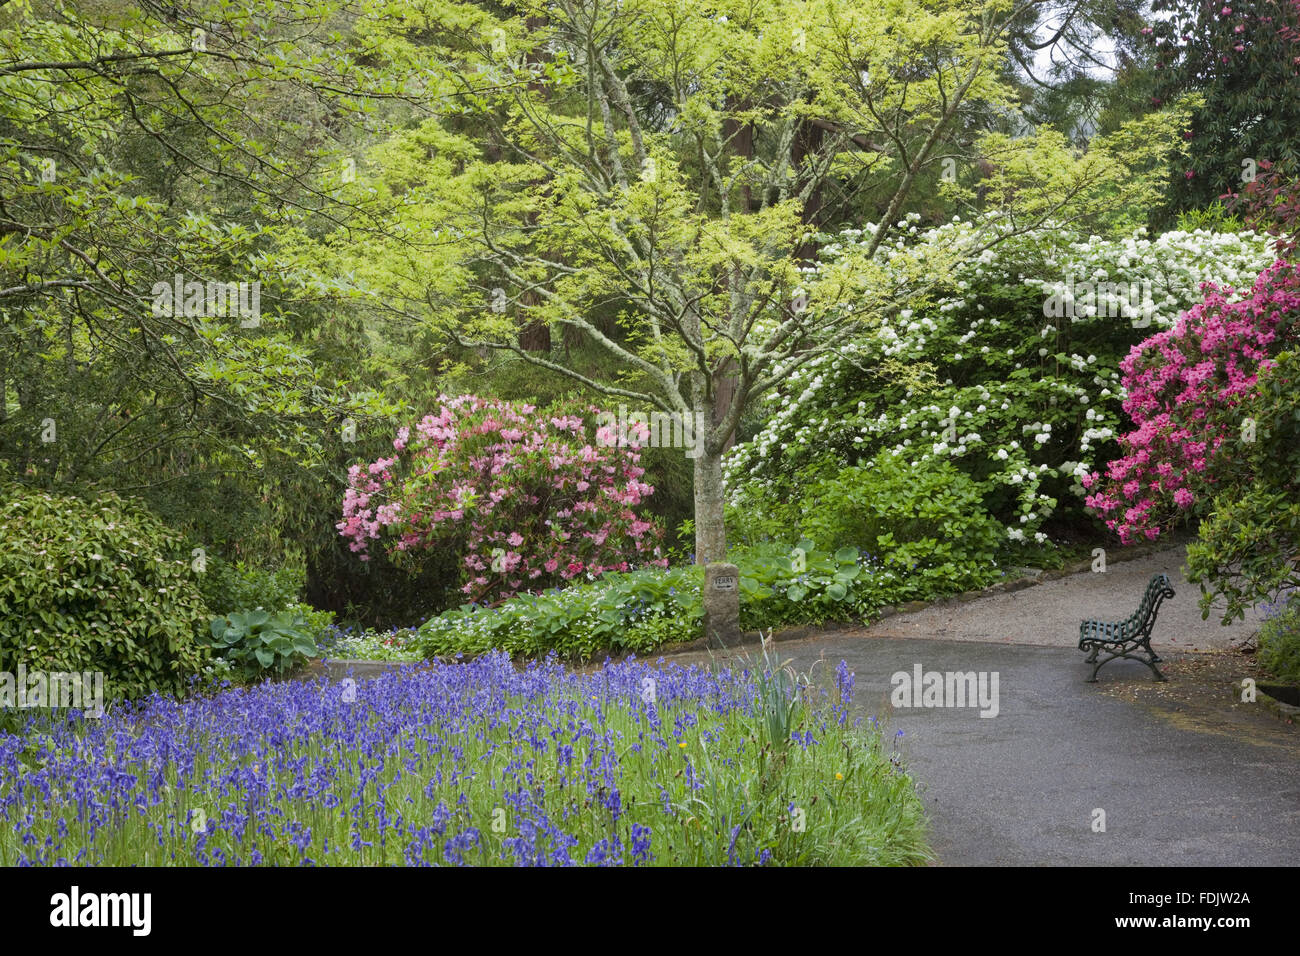 Rhododendrons, azaleas and bluebells in flower at Trelissick Garden, Cornwall, in May. Stock Photo